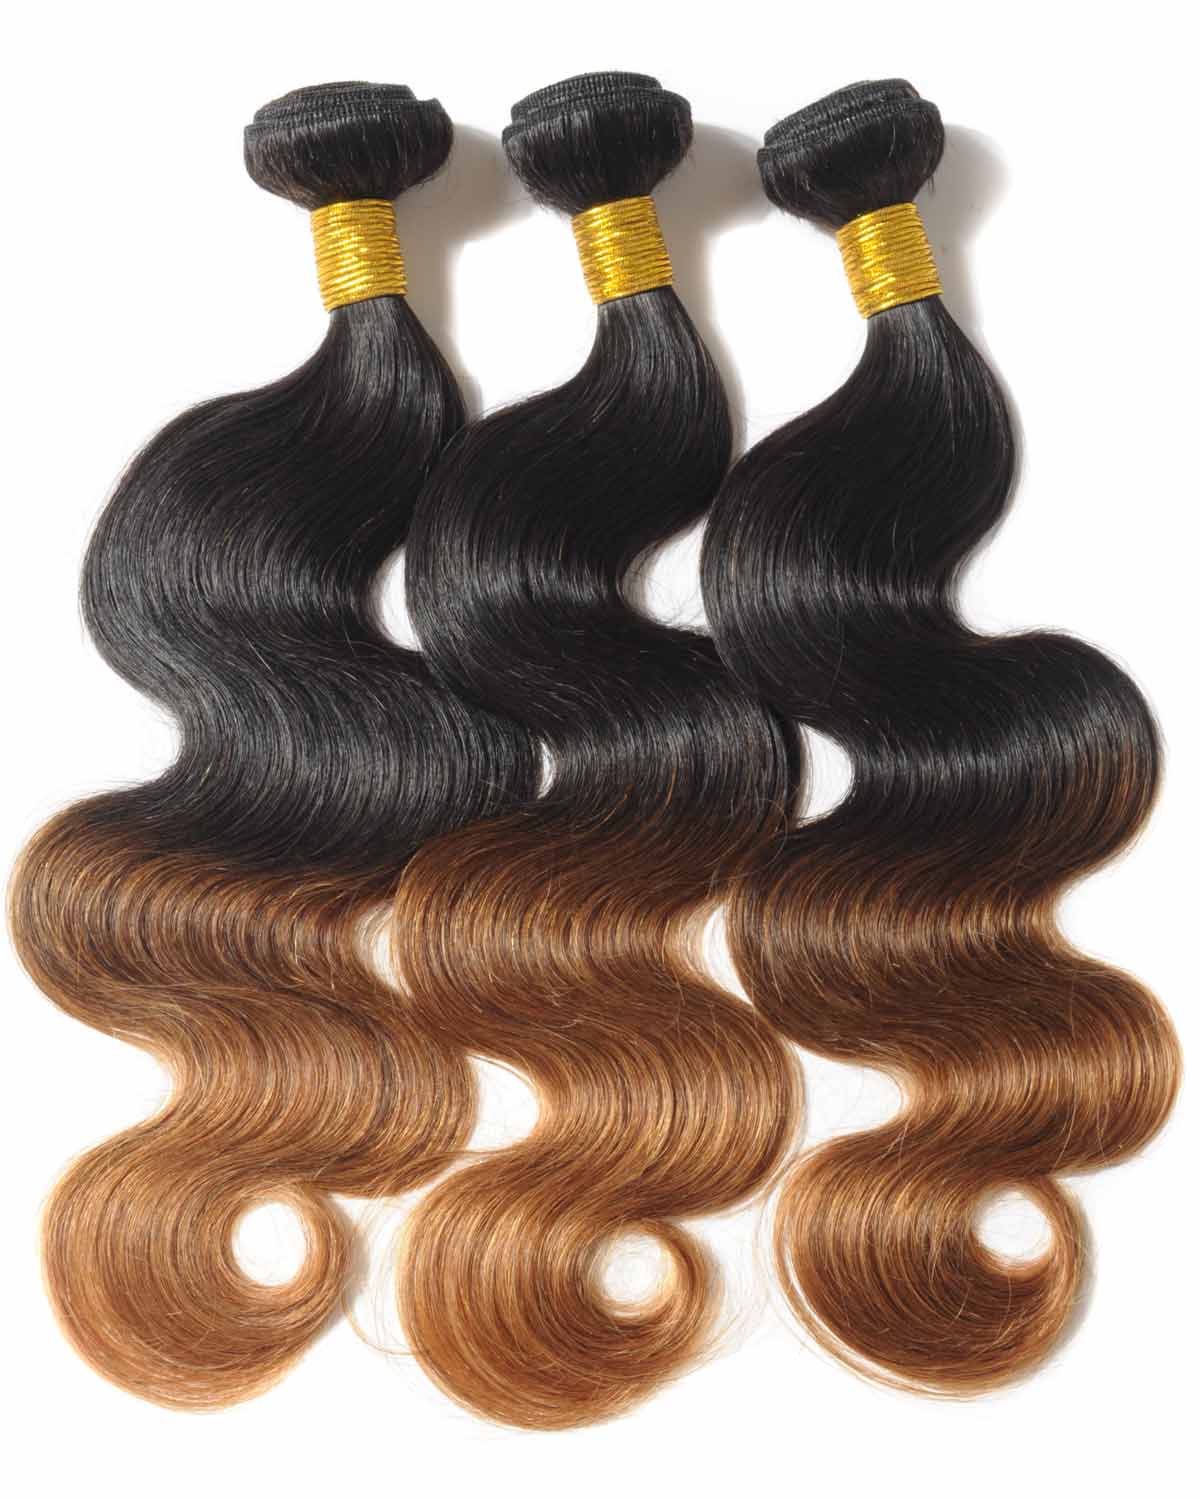 Ombré Remy Machine Weft hair extensions